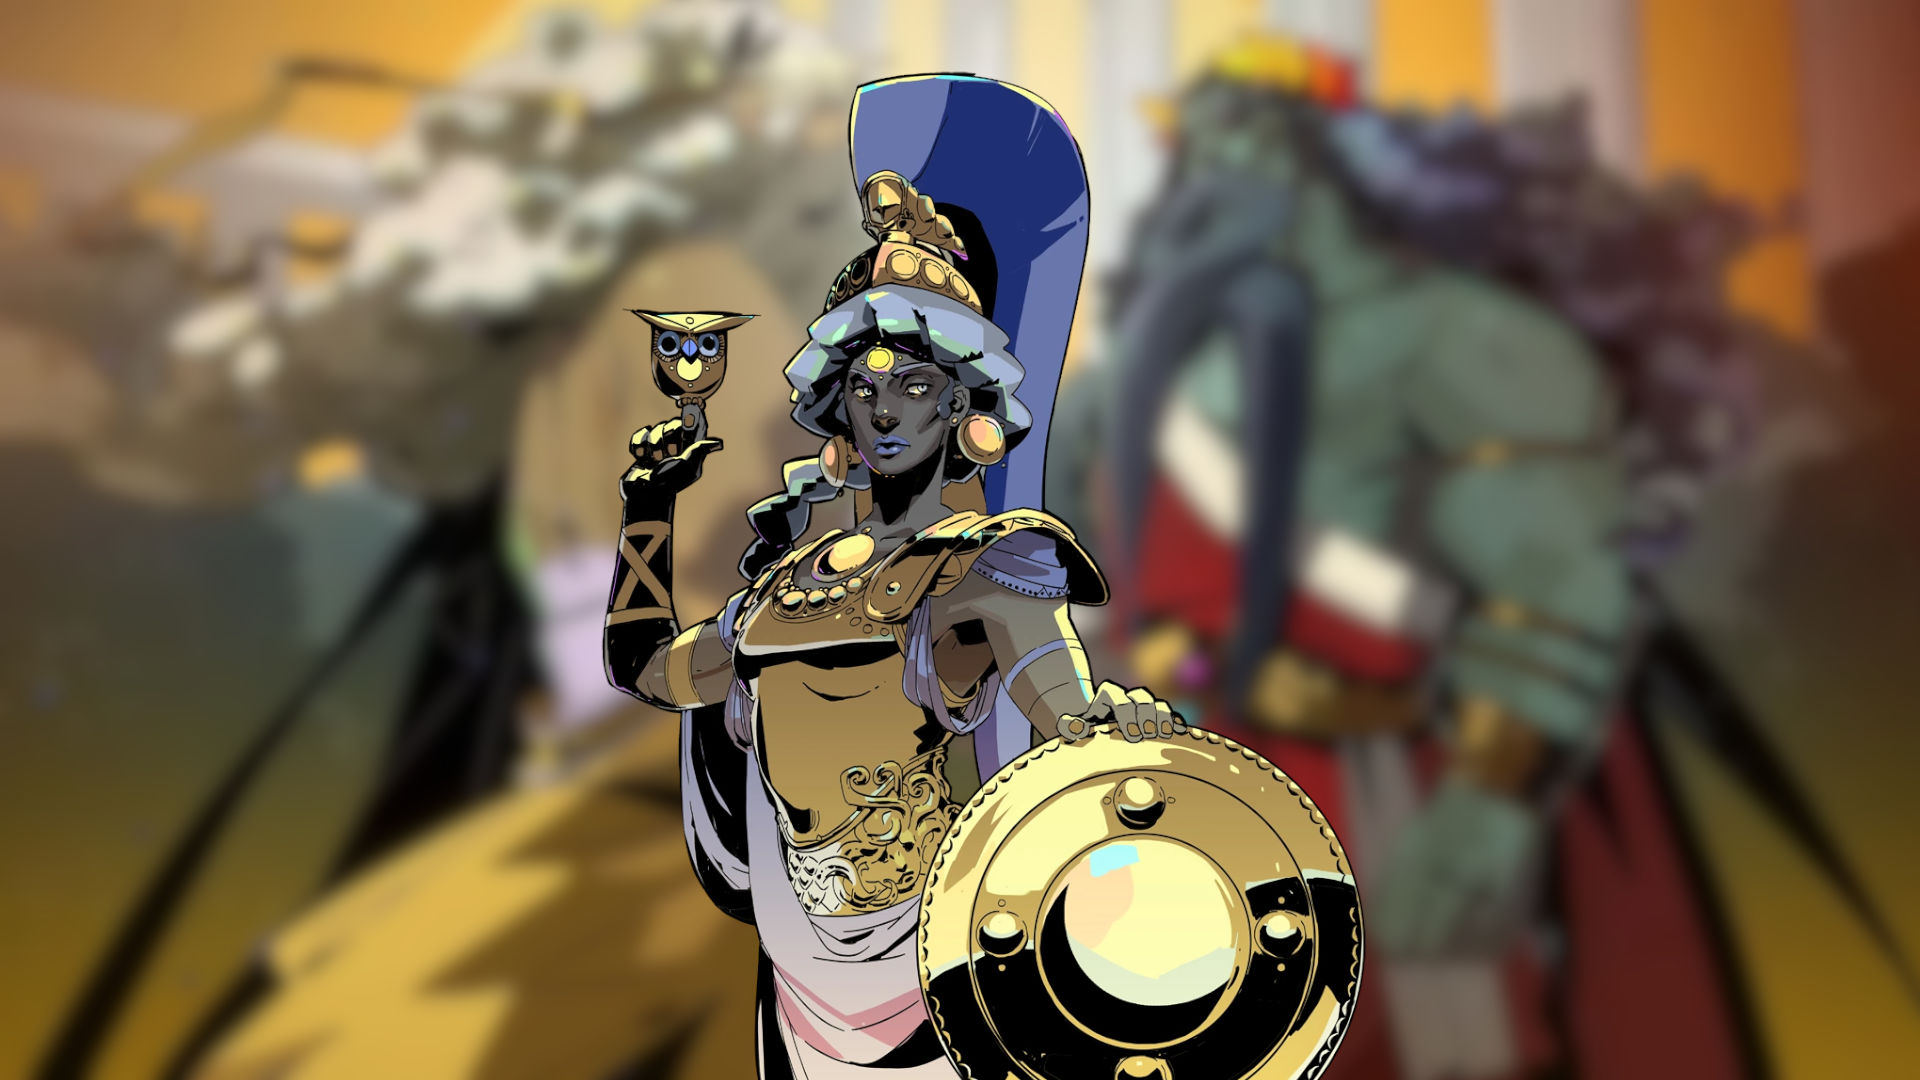 Key art of Athena, one of the many Hades characters